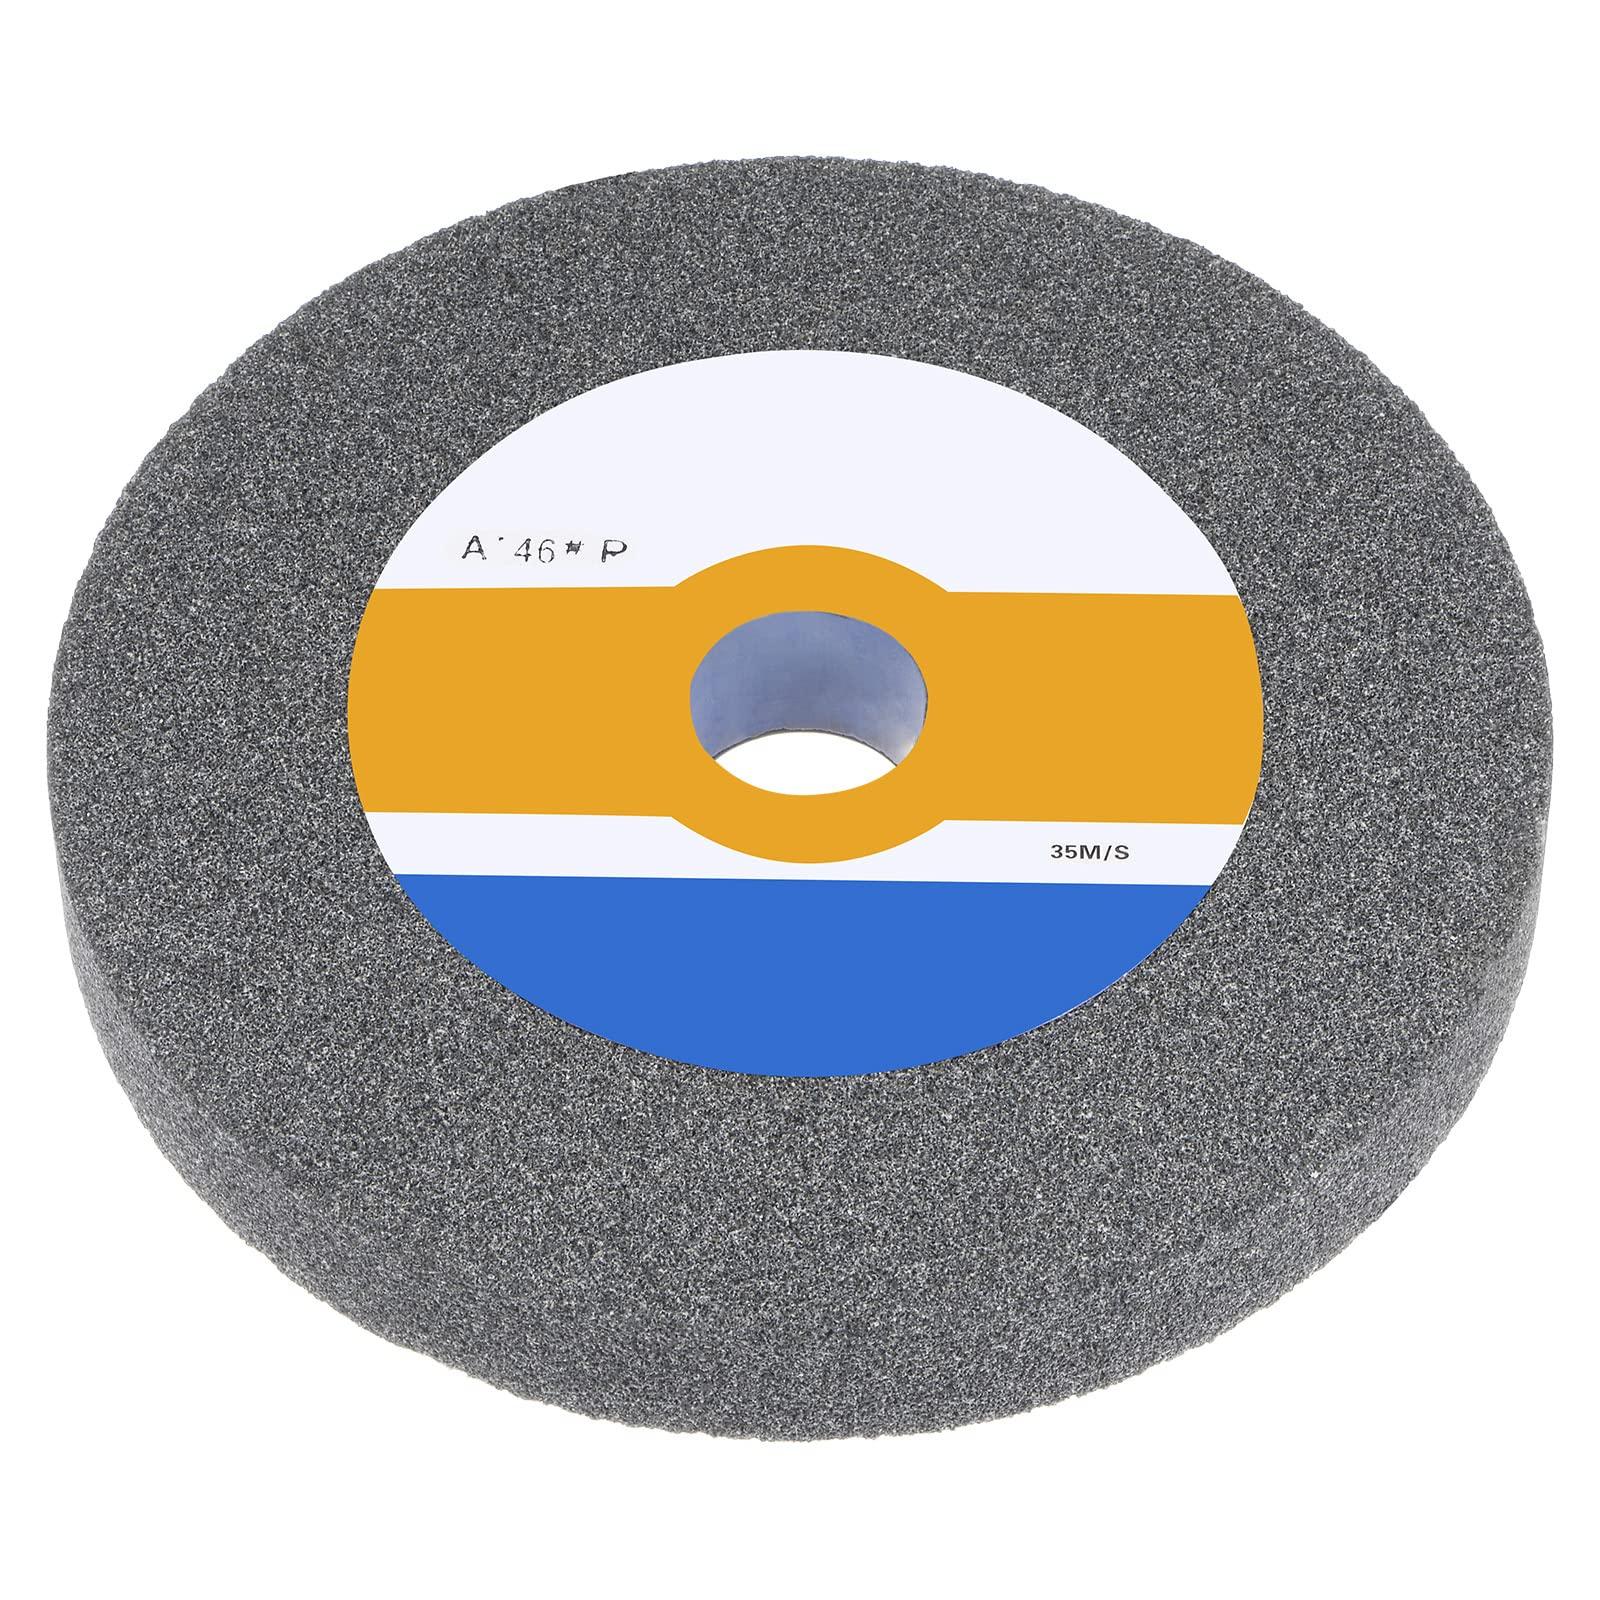 sourcing map Bench Grinding Grinding Wheel 200mm x 32mm 8 Inch 46 Grit 1" Thickness 1-1/4 Inch Arbor Aluminum Oxide Grinding Wheel Grinding and Cutting Grinder Wheel for Cars Machinery, Grey